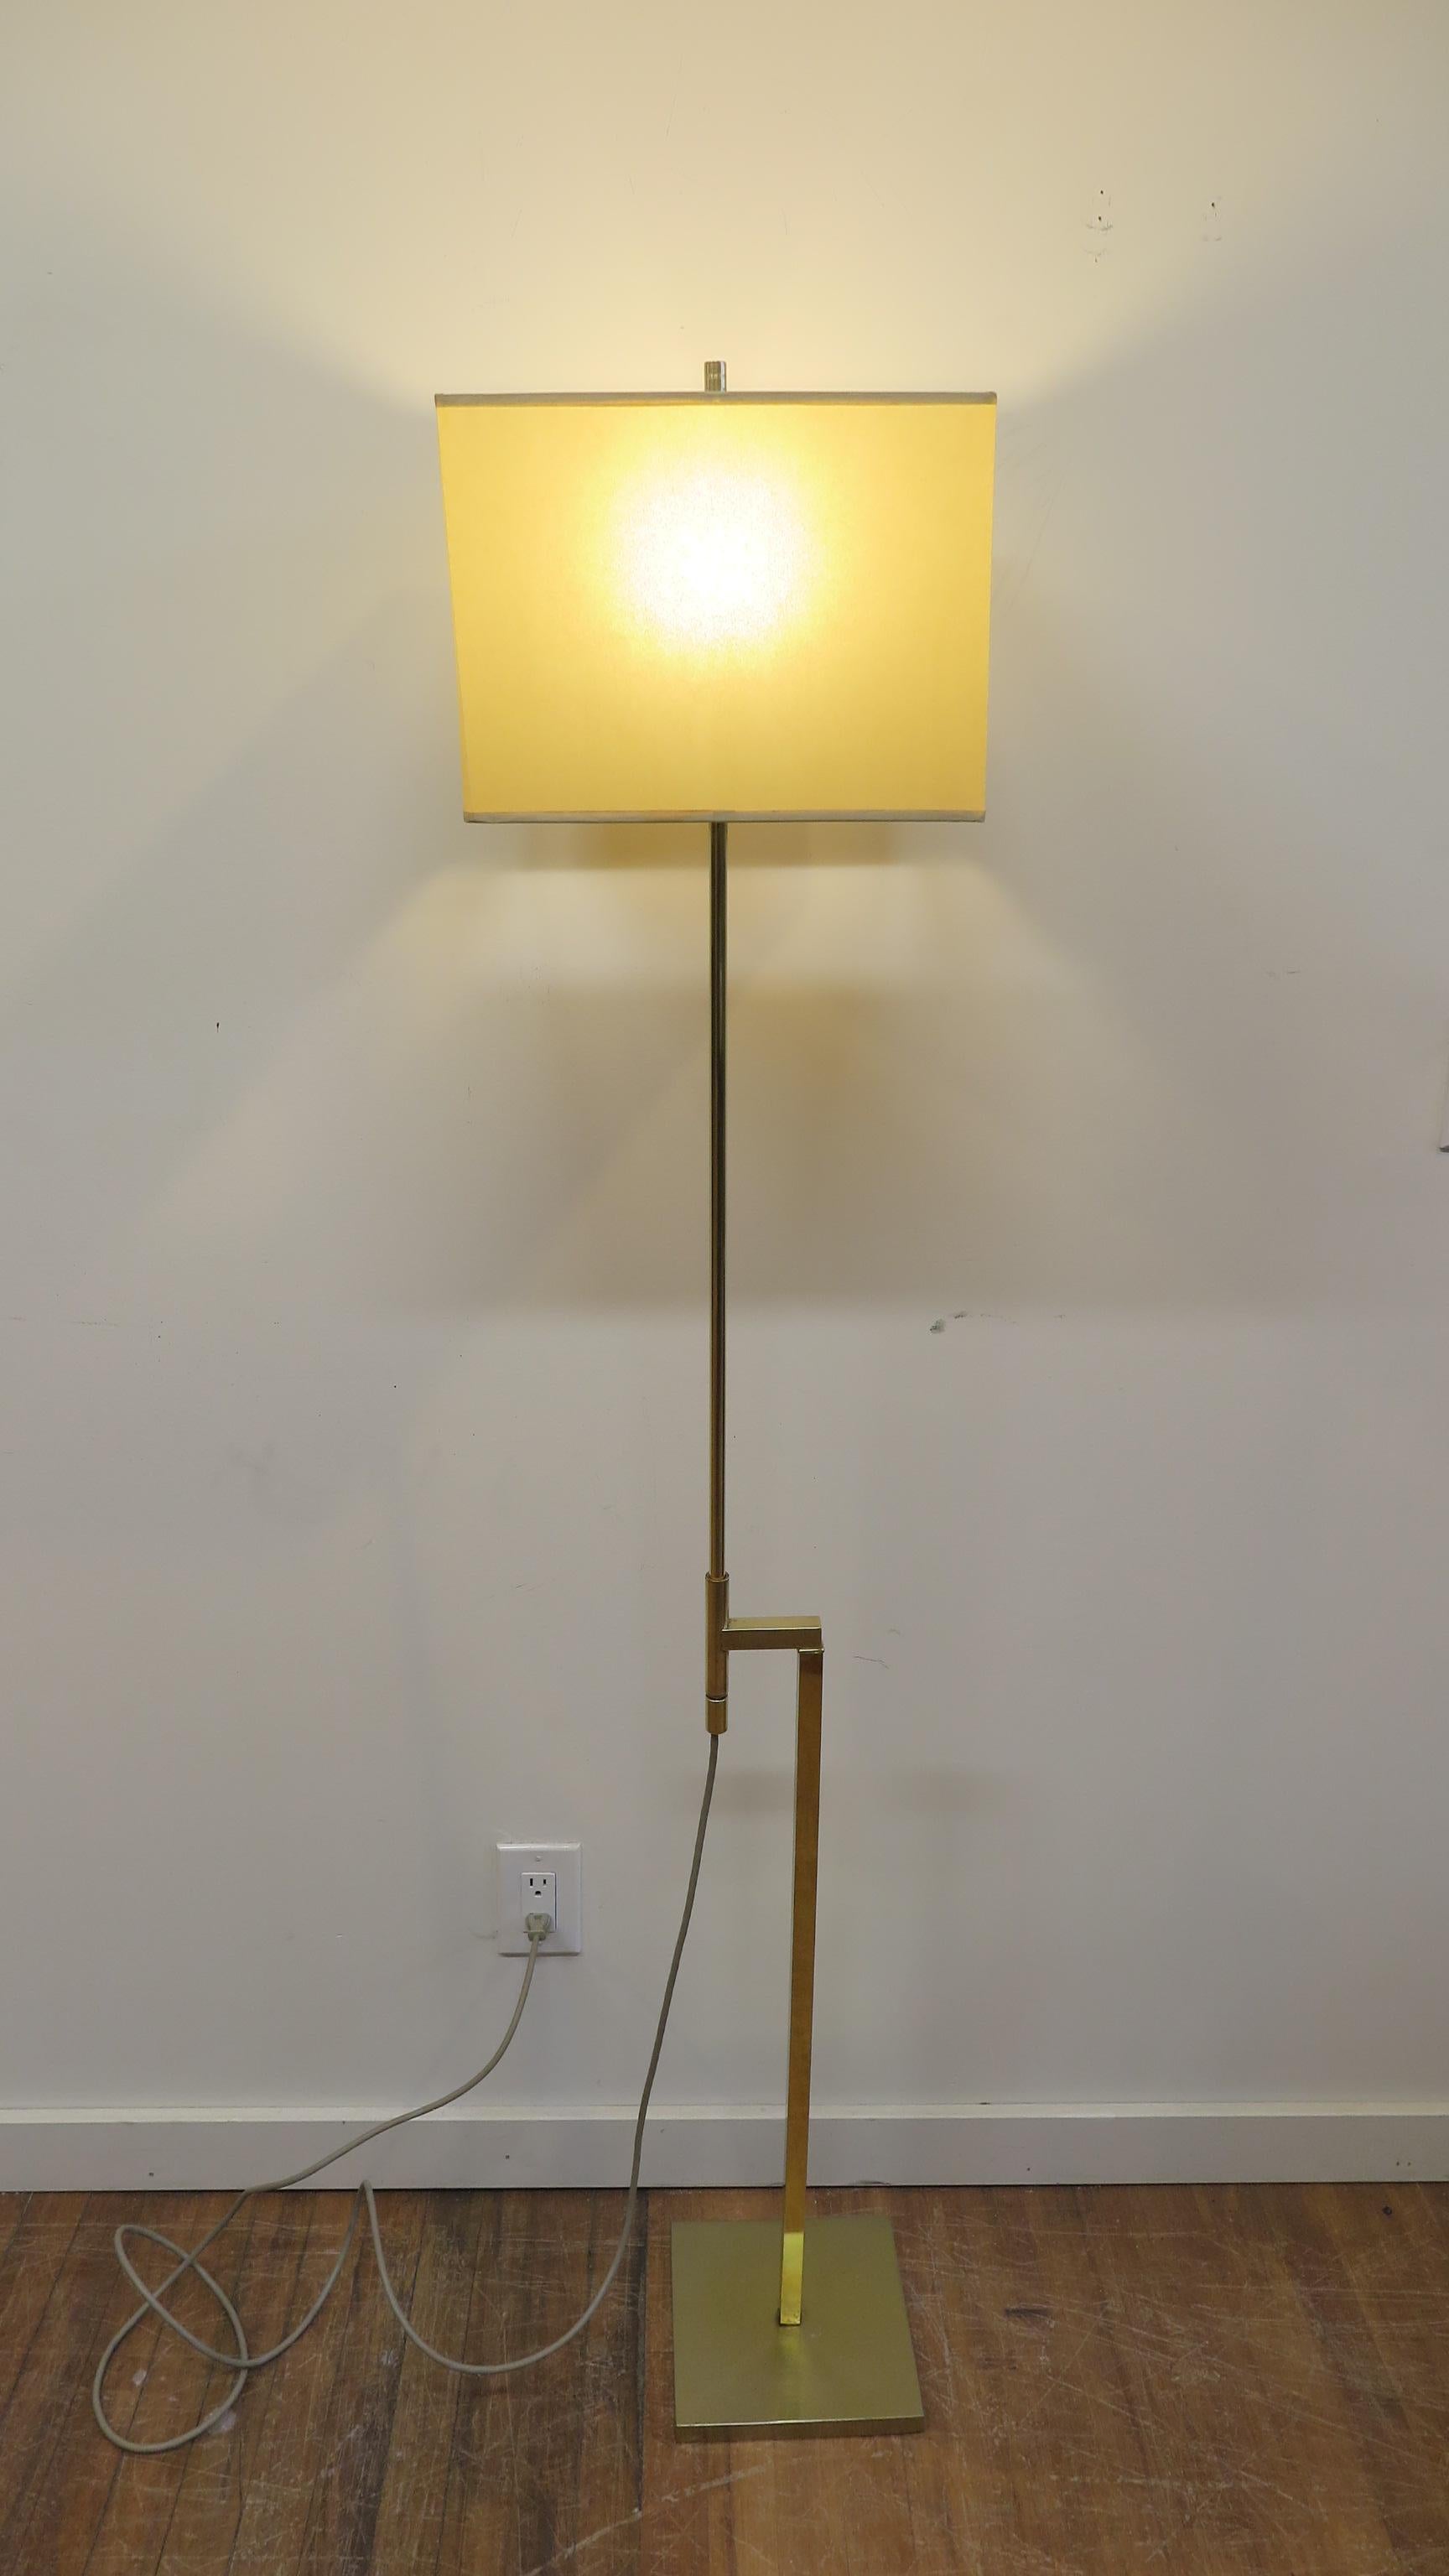 Laurel brass floor lamp adjustable height with built in dimmer. Height can be from 43 to 65 inches. Note solid brass socket with built in dimmer switch LED capable. Height is adjusted by sliding the pole up or down. This lamp is in very good